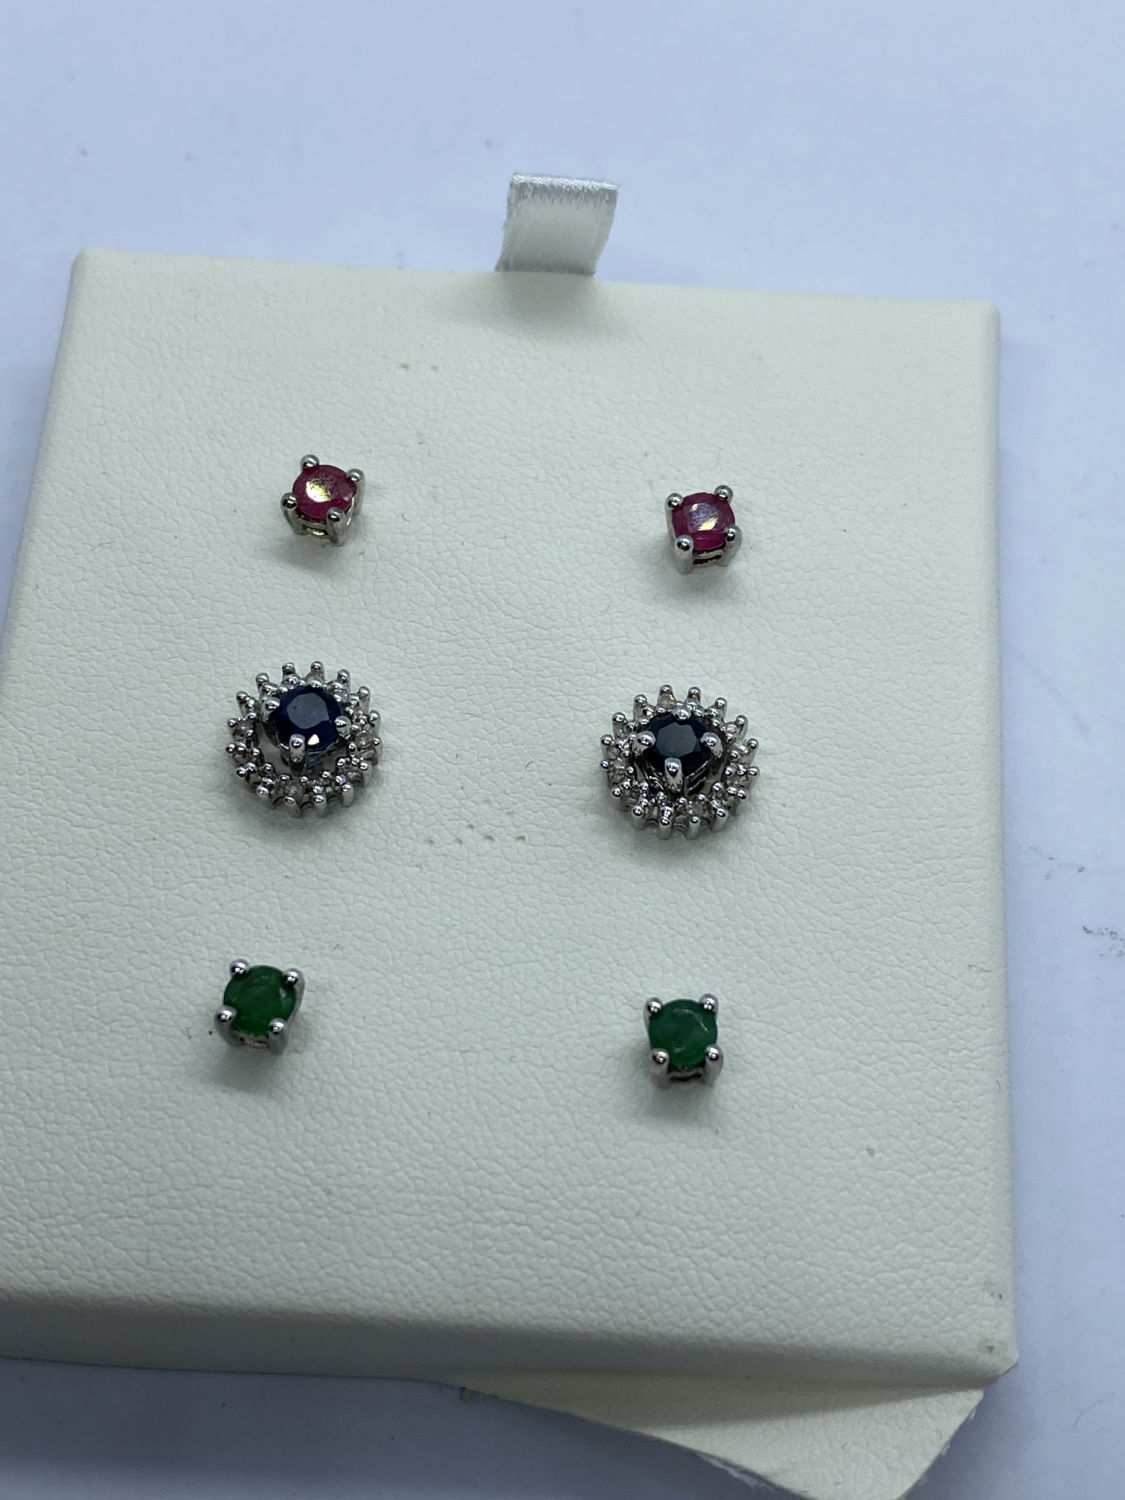 BLUE SAPPHIRE, RUBY, EMERALD AND DIAMOND INTERCHANGEABLE EARRINGS SET IN WHITE METAL - Image 2 of 3